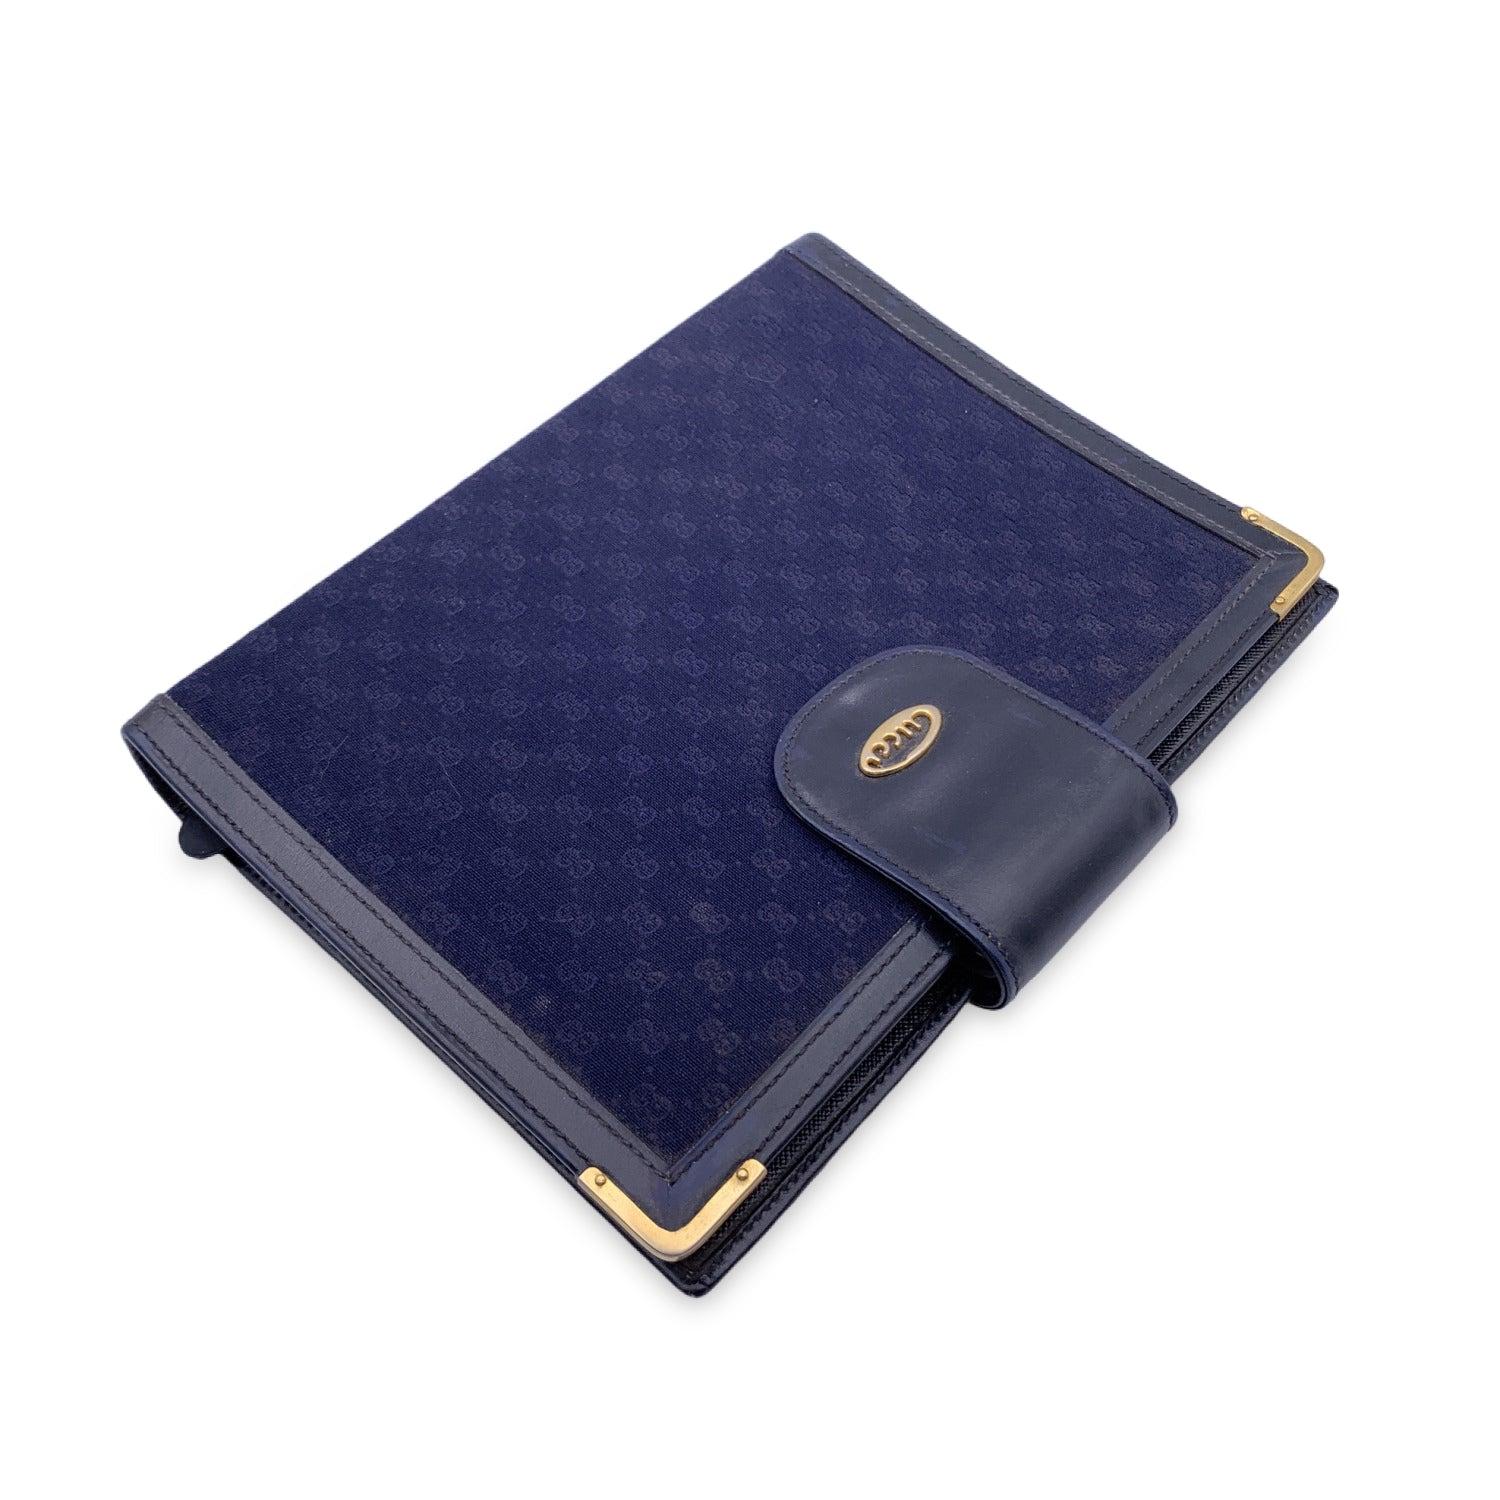 Vintage Agenda cover by GUCCI. It features a 4 ring binder inside. 1 side open slot inside. Button closure. Leather interior. 'Made in Italy by GUCCI' stamper internally. Details MATERIAL: Cloth COLOR: Blue MODEL: n.a. GENDER: Unisex Adults COUNTRY